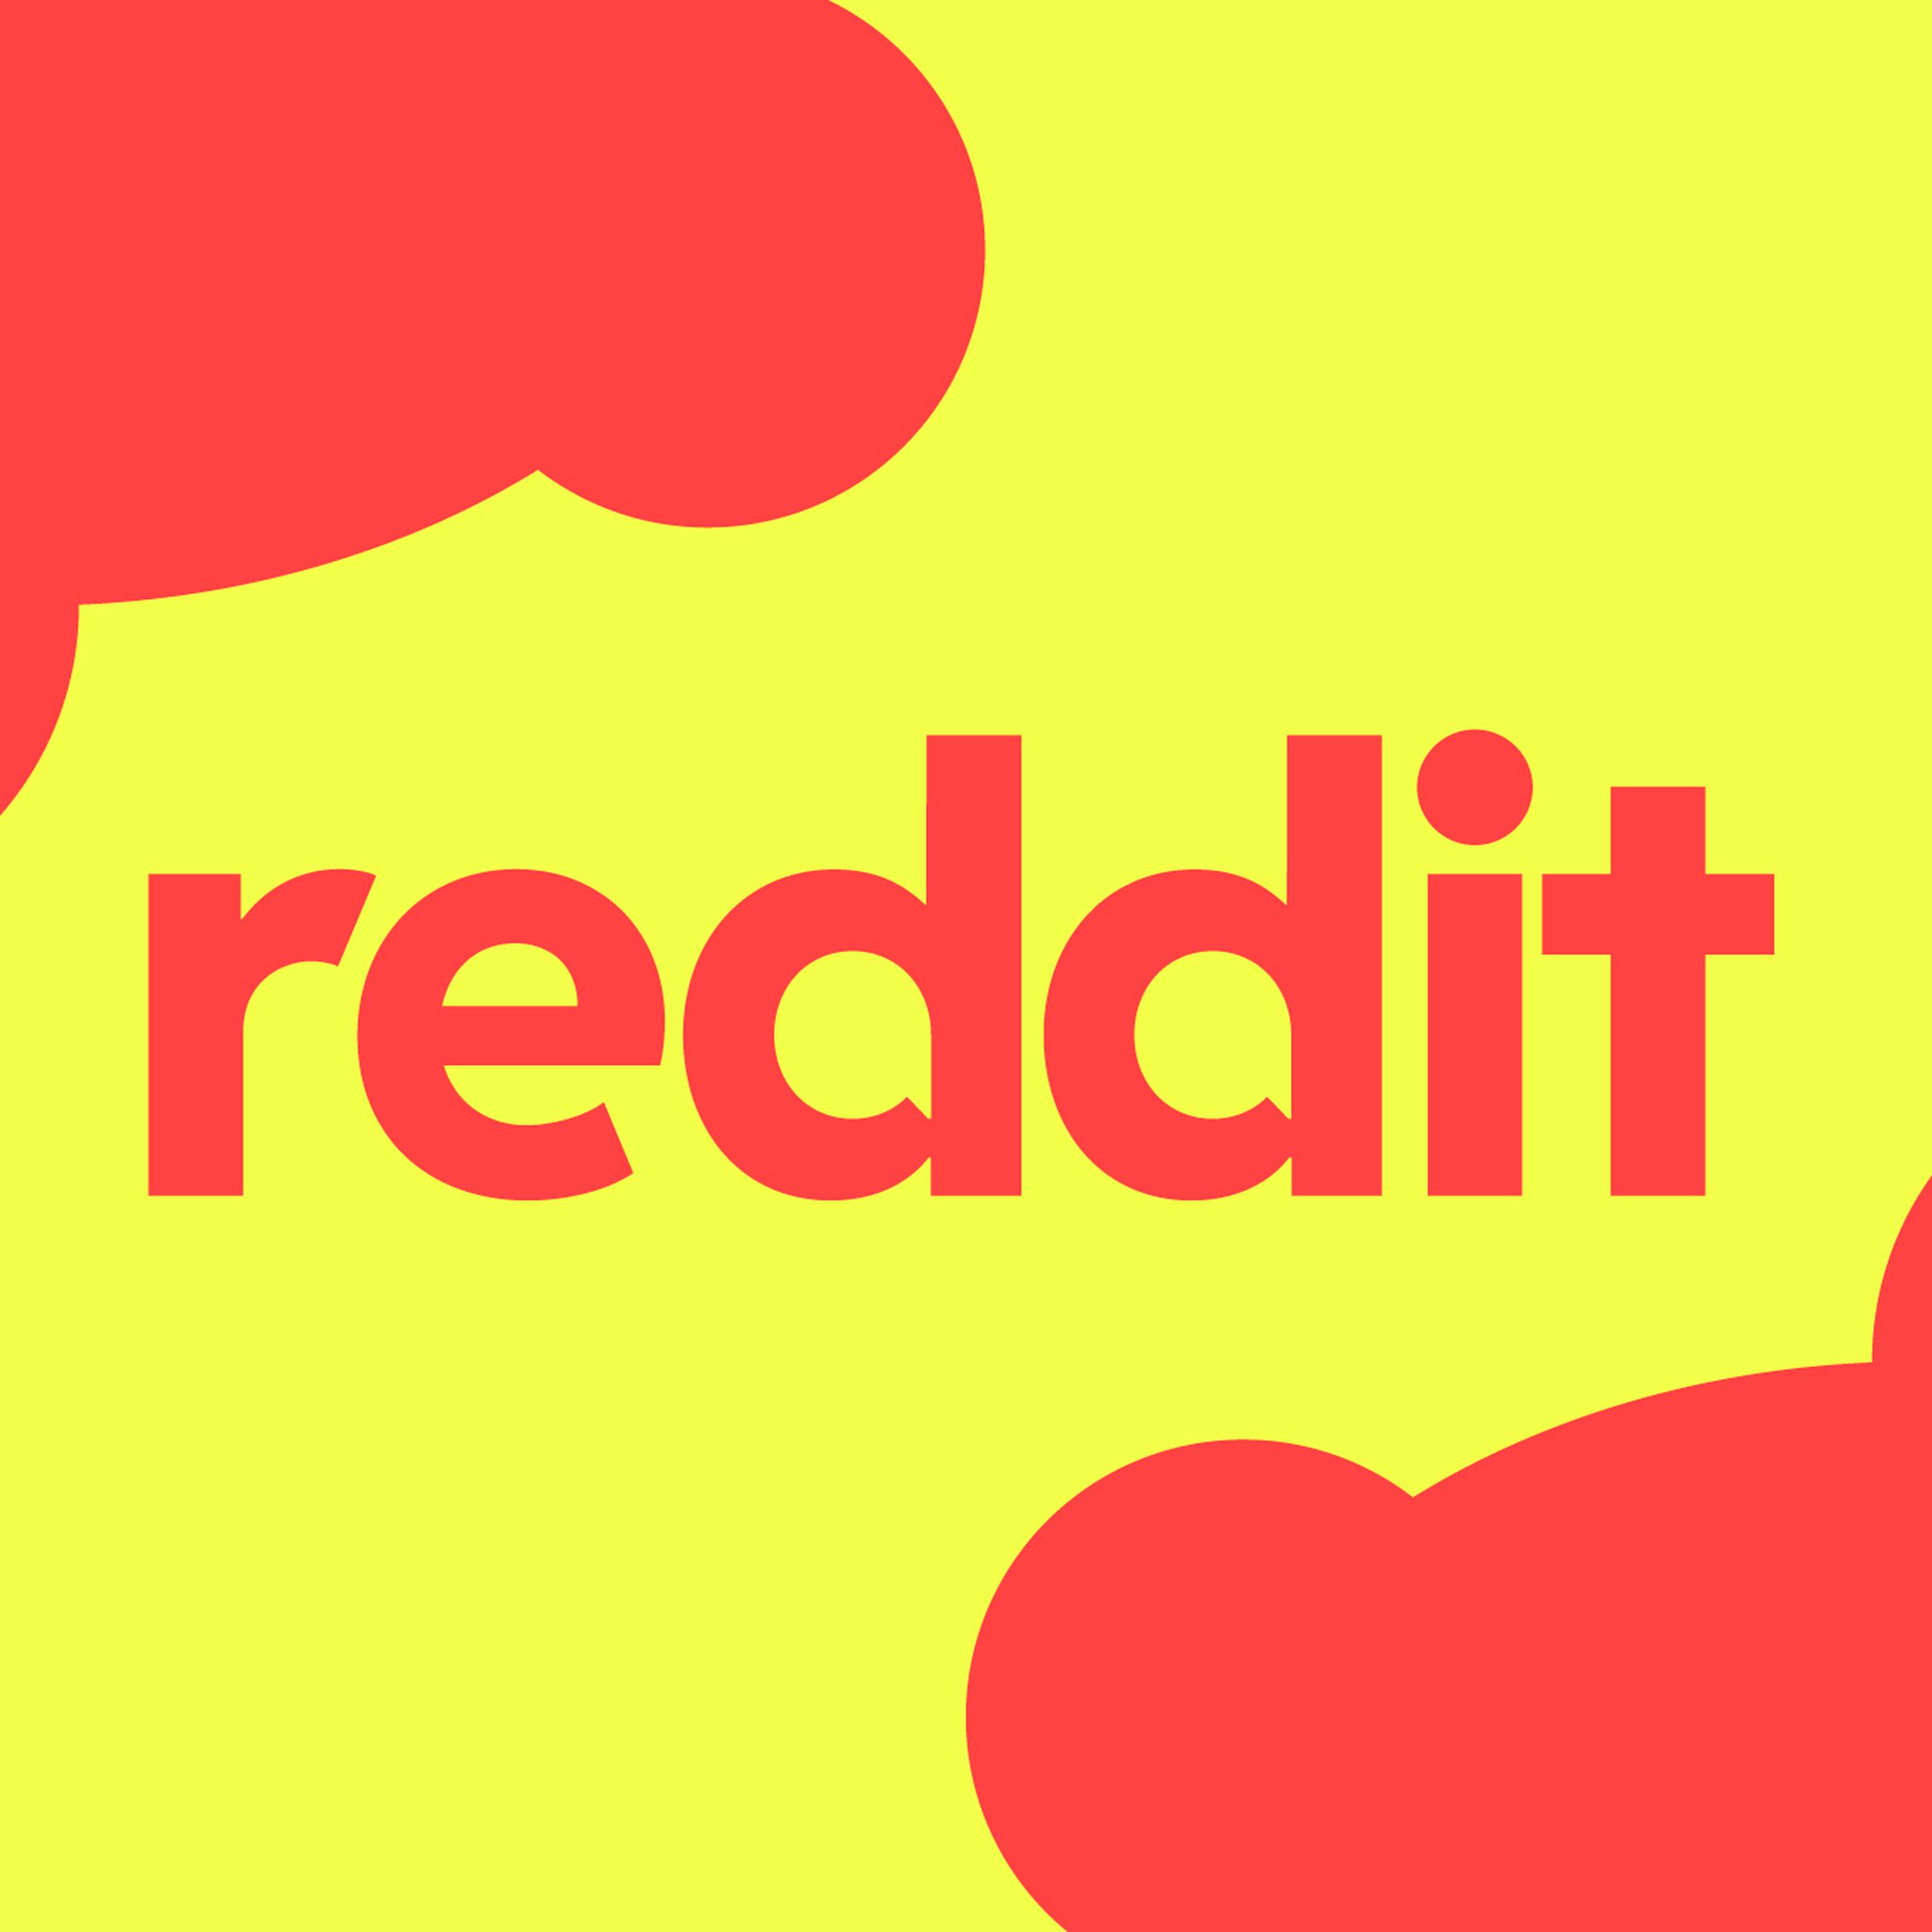 The Reddit wordmark on a yellow background, with its Snoo character framing it.